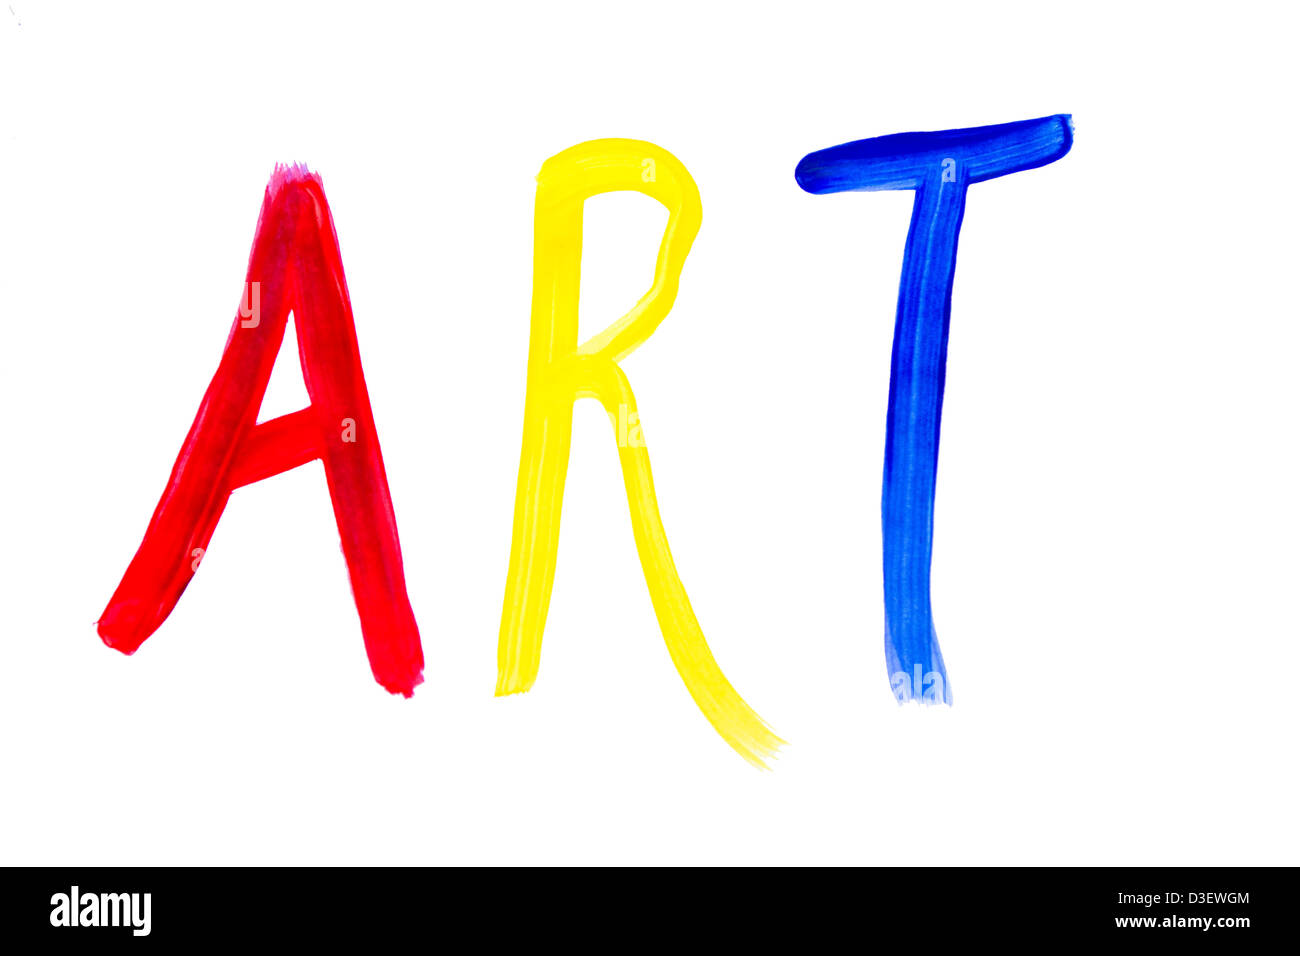 ART painted in yellow red and blue Stock Photo